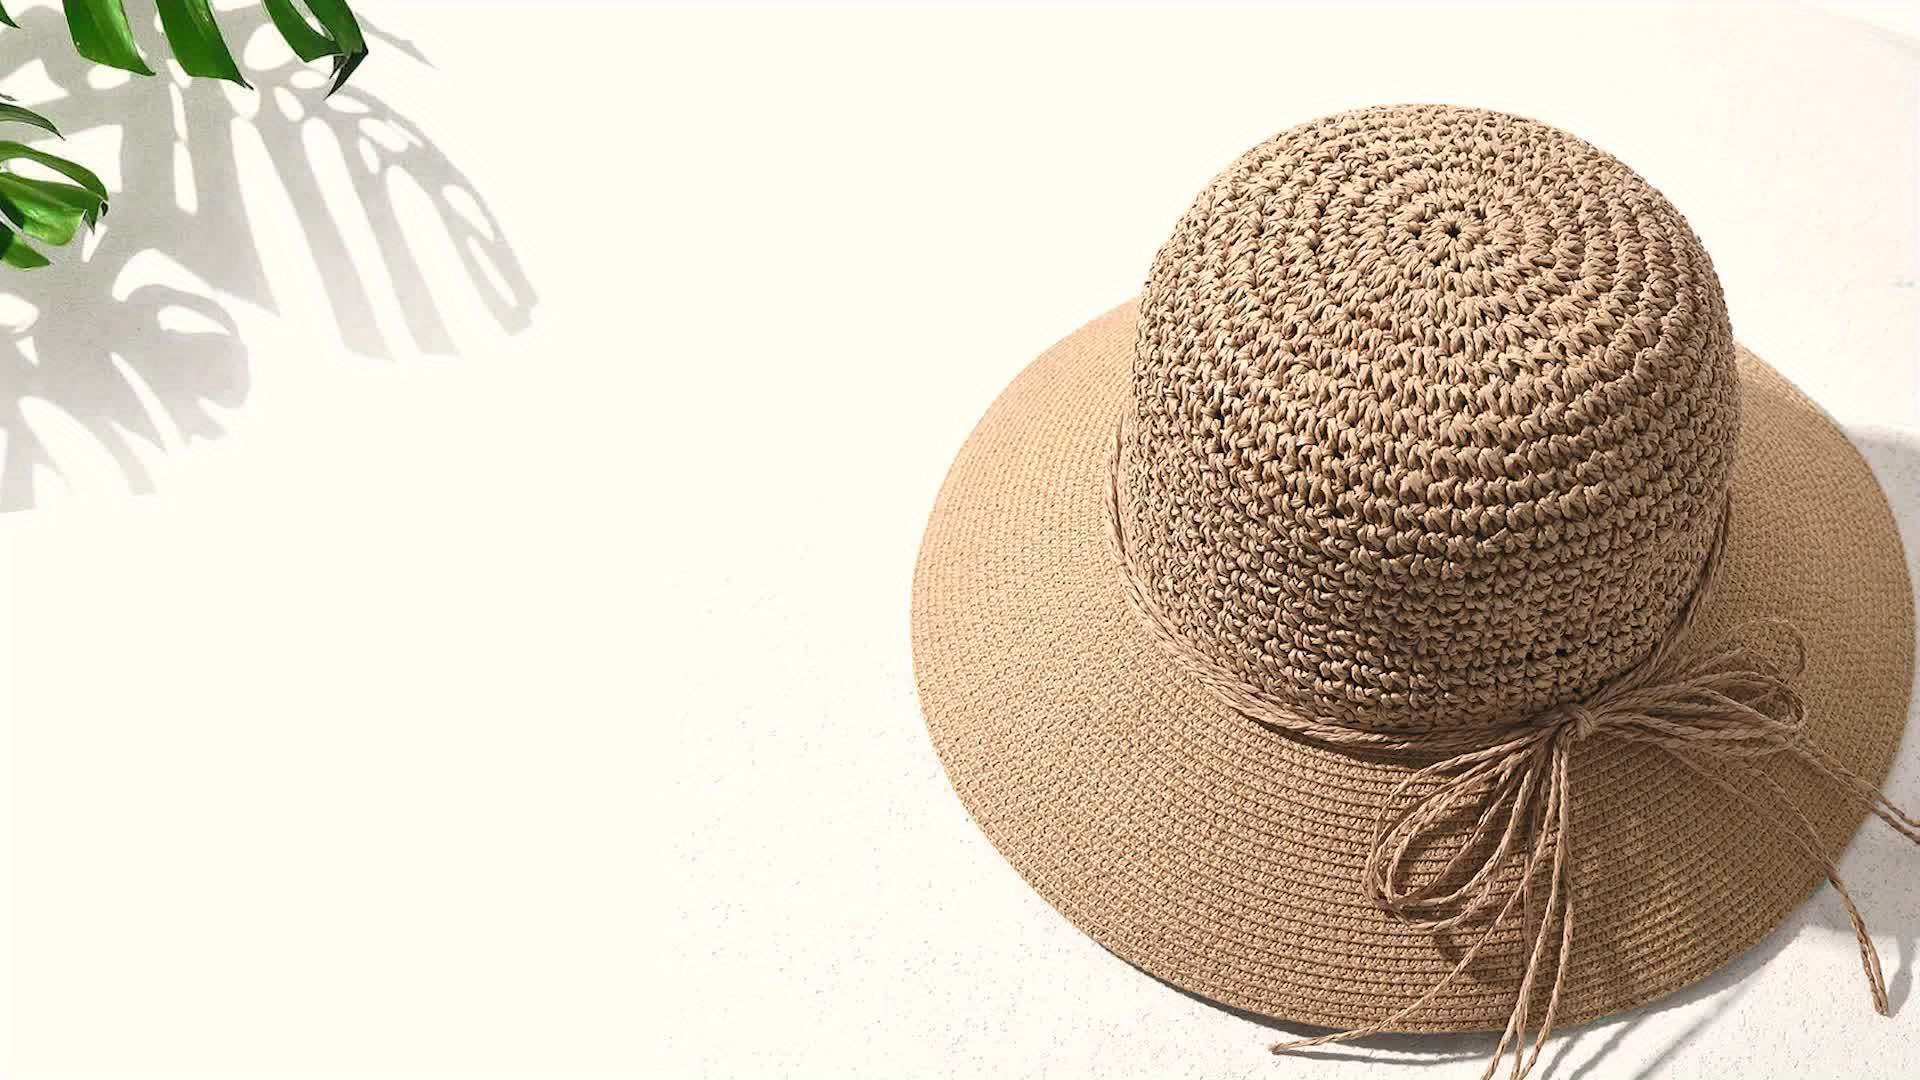 1pc Sun Hats For Men Women, Wide Brim Handmade Straw Beach Hat, Brearhable And Foldable Packable For Travel